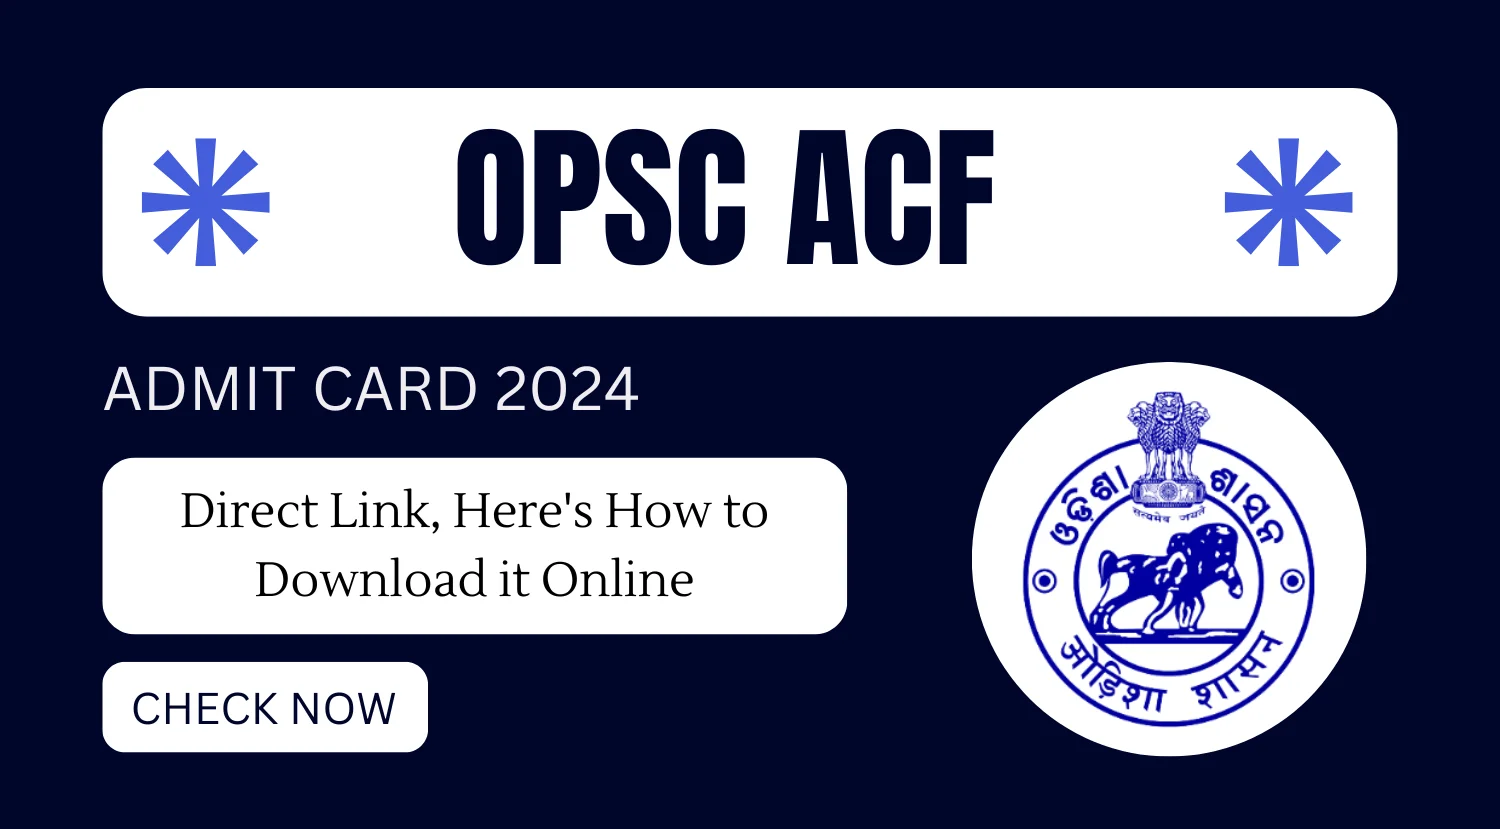 OPSC ACF Admit Card 2024 Direct Link Heres How to Download it Online